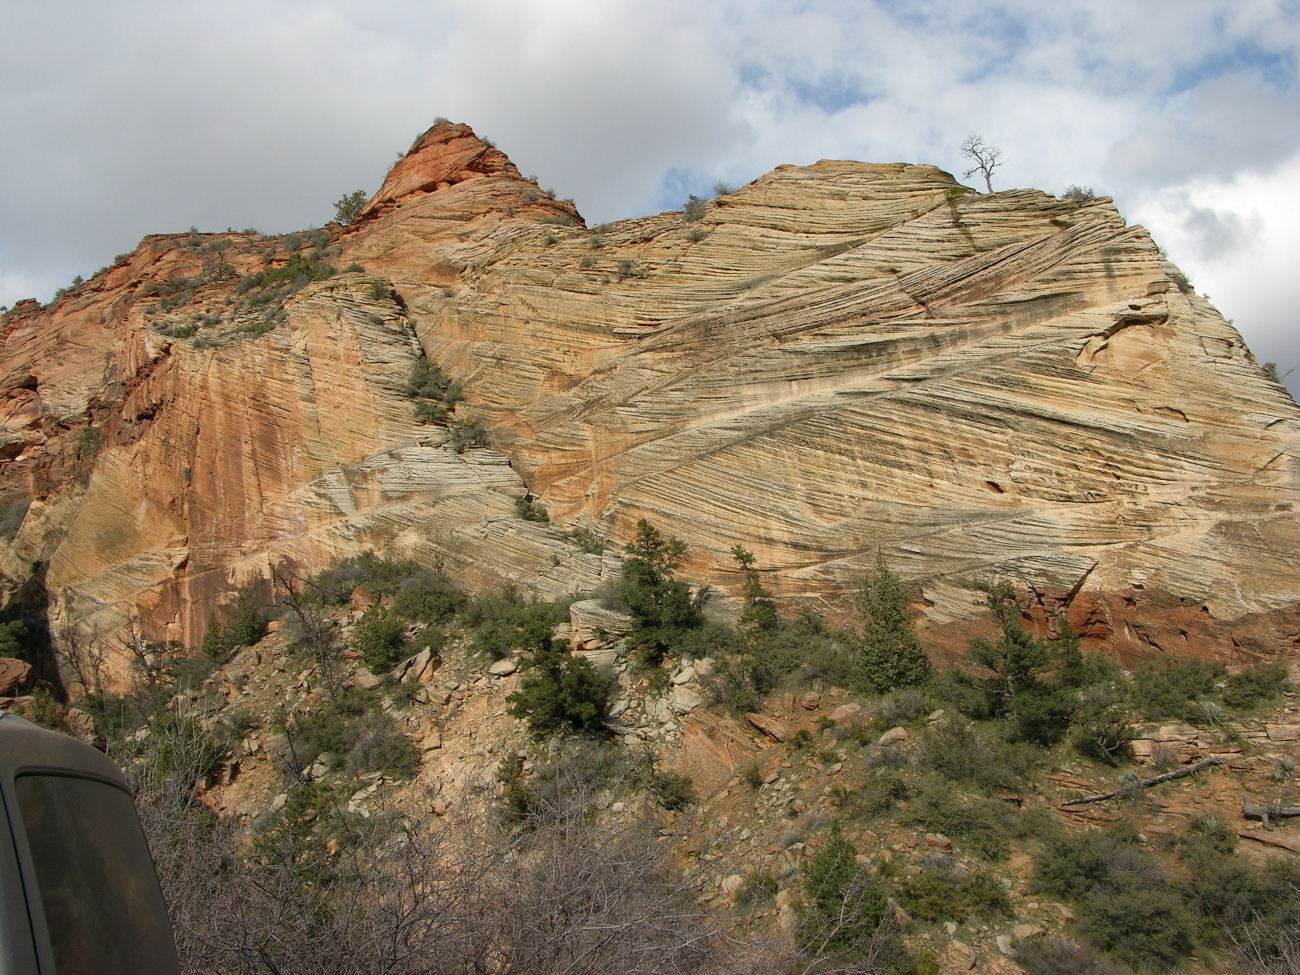 A view in Zion National Park